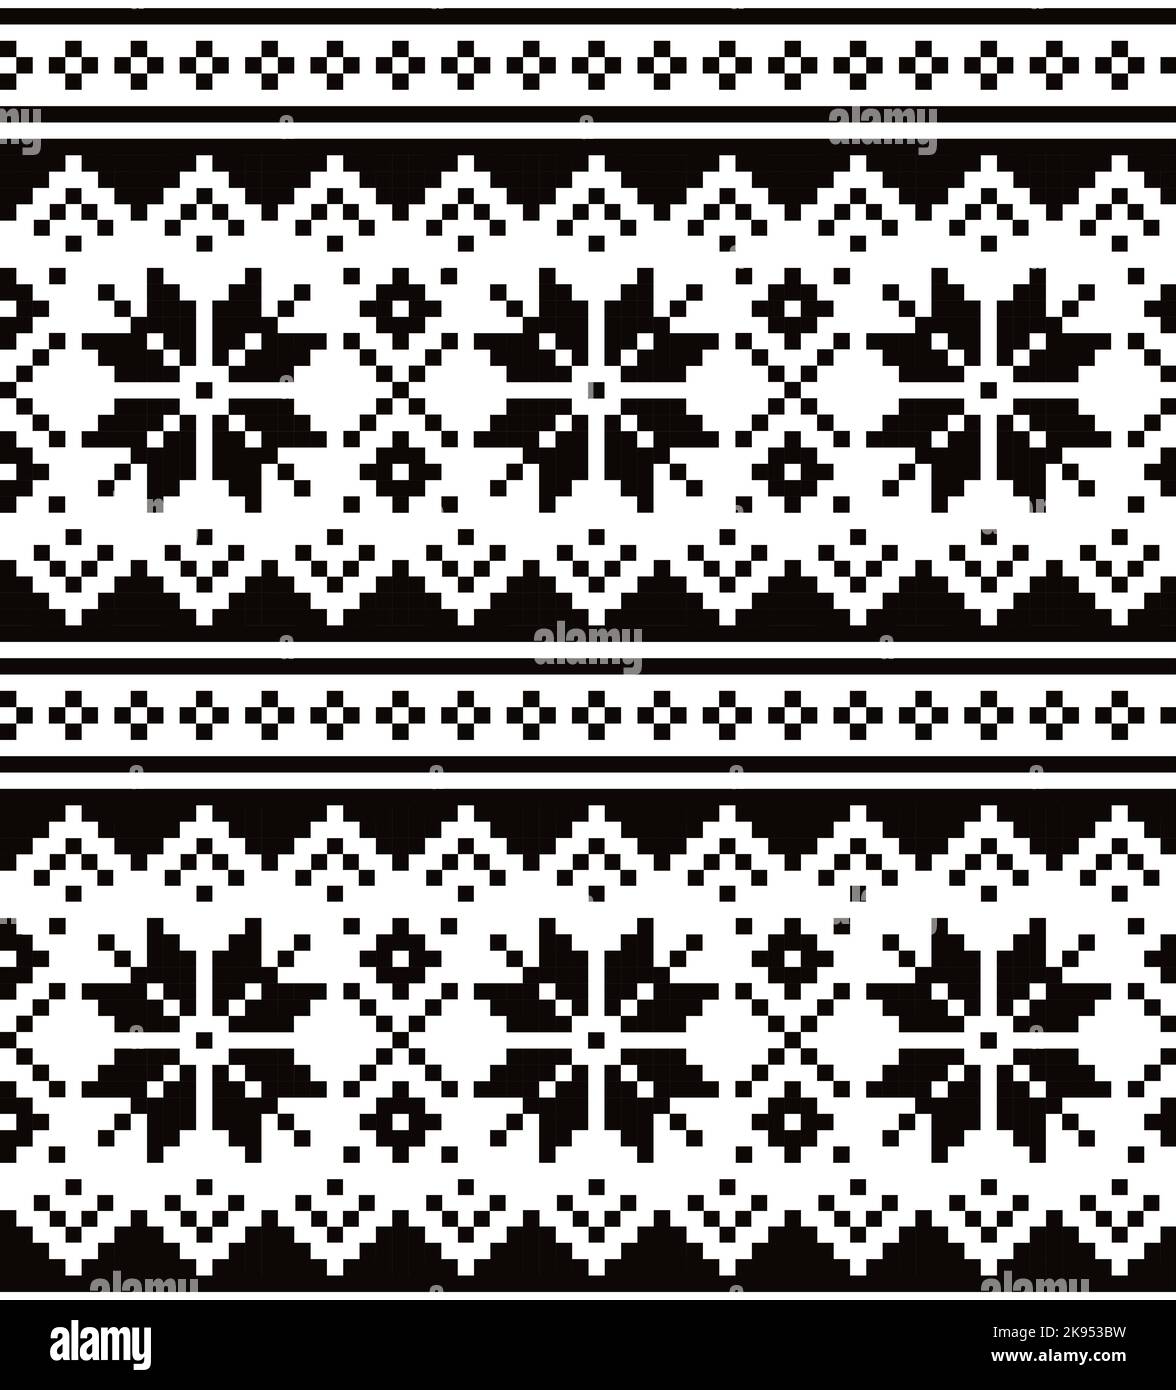 Christmas winter vector seamless black and white pattern with snowflakes, inspired by Sami people, Lapland folk art design, traditional knitting and e Stock Vector